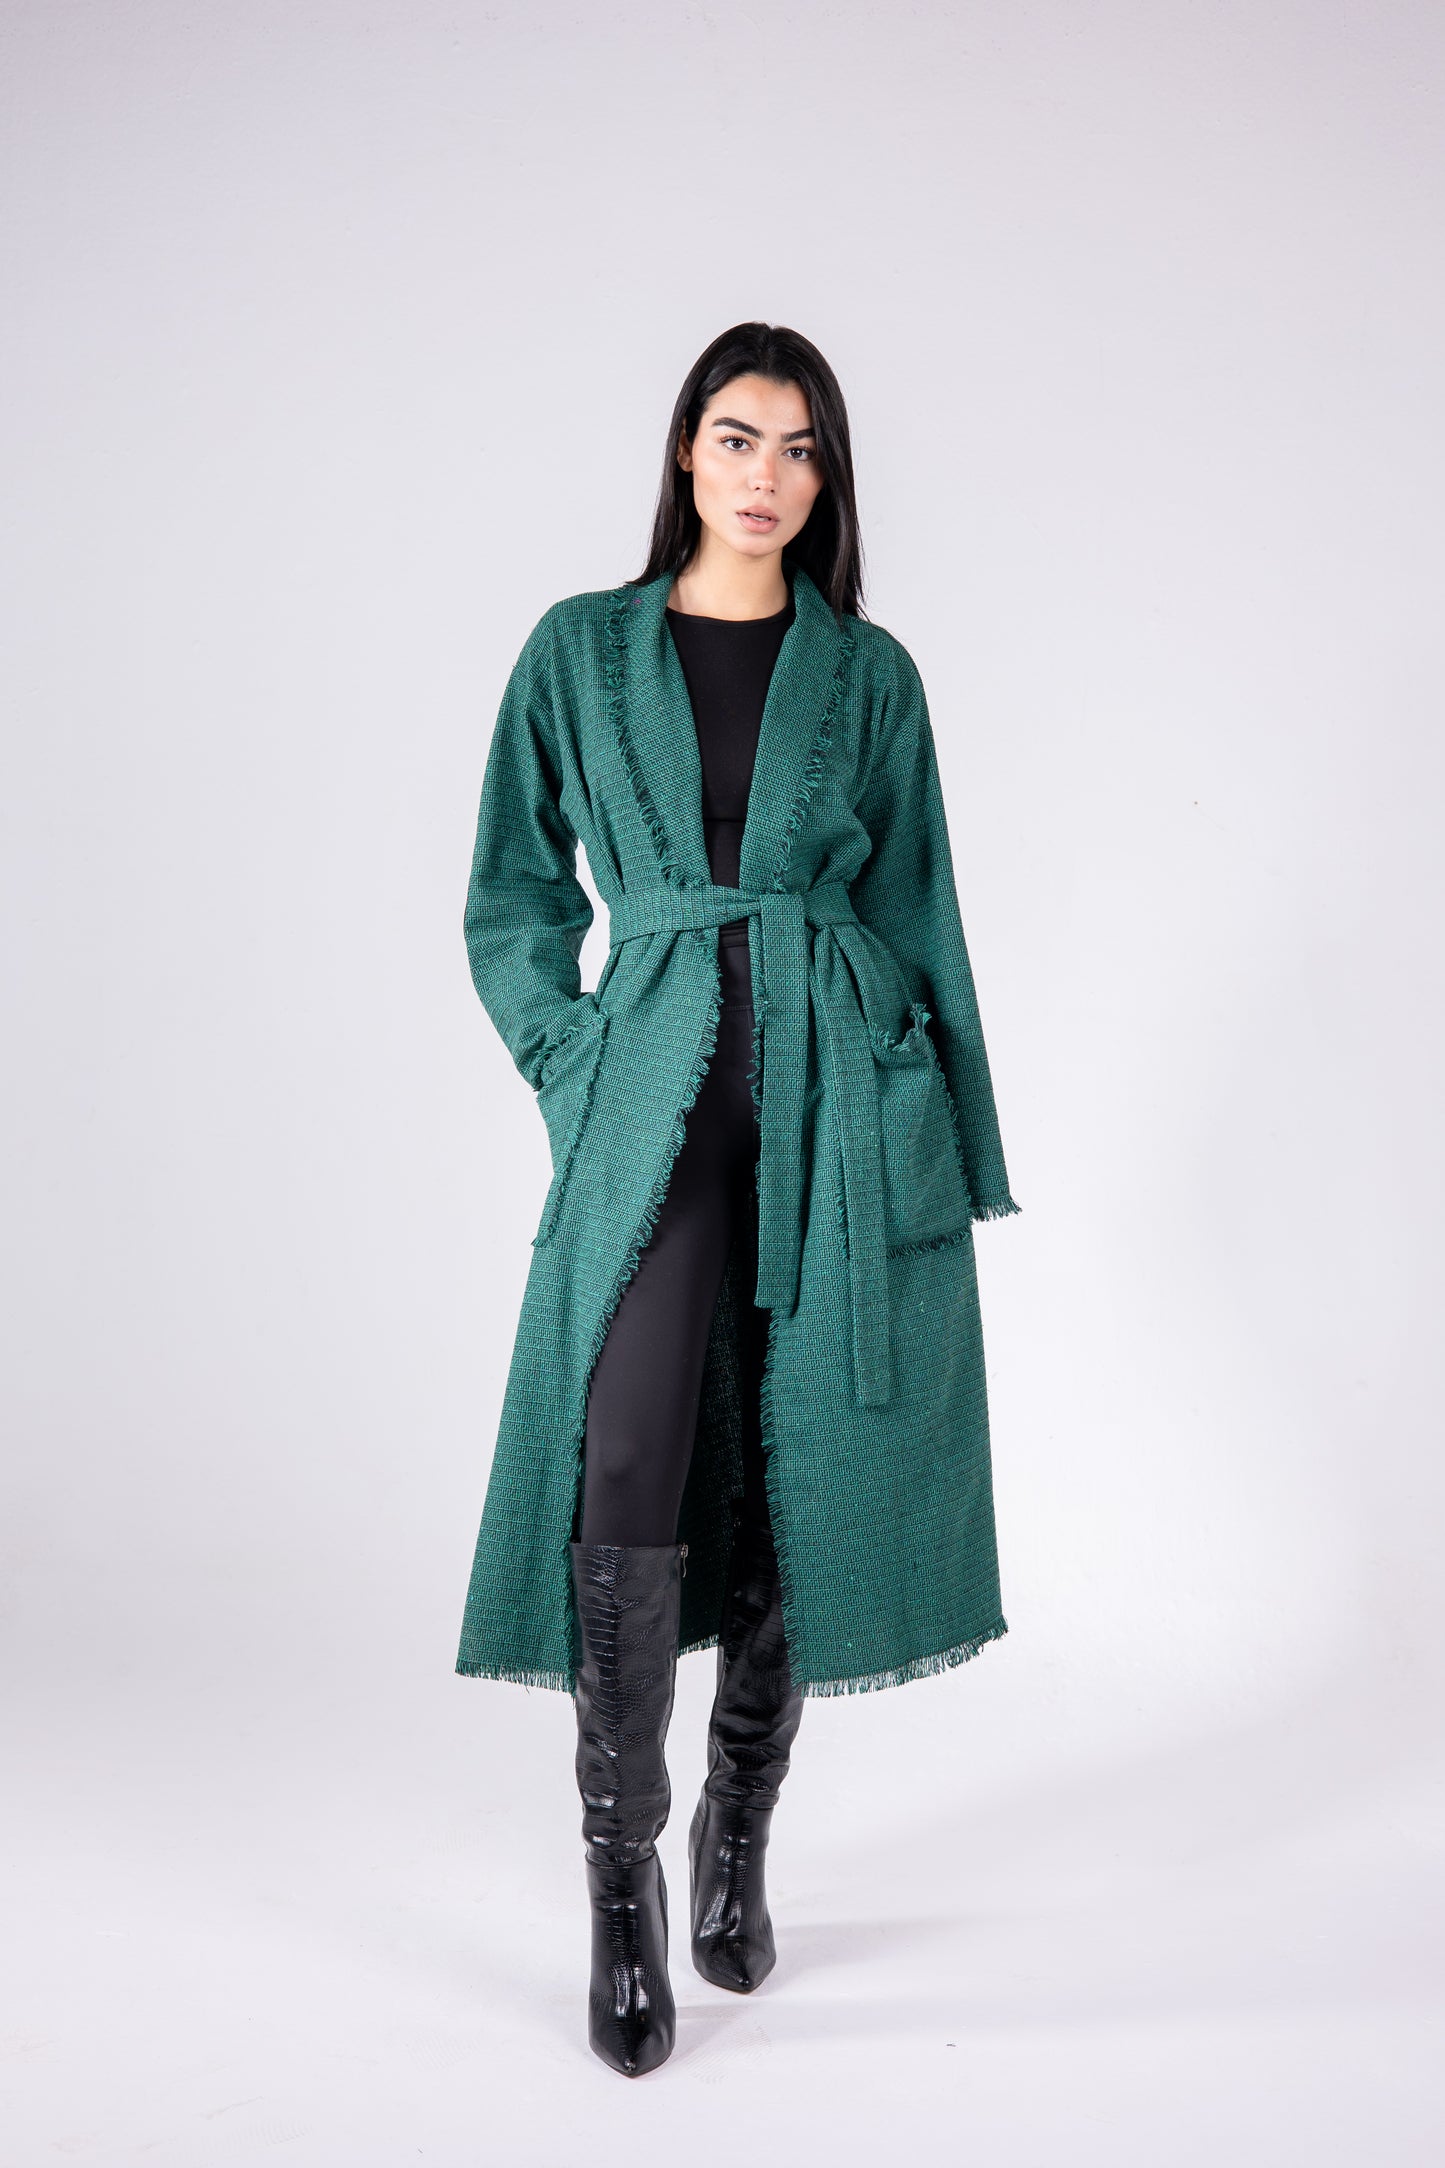 The eve manteau in green